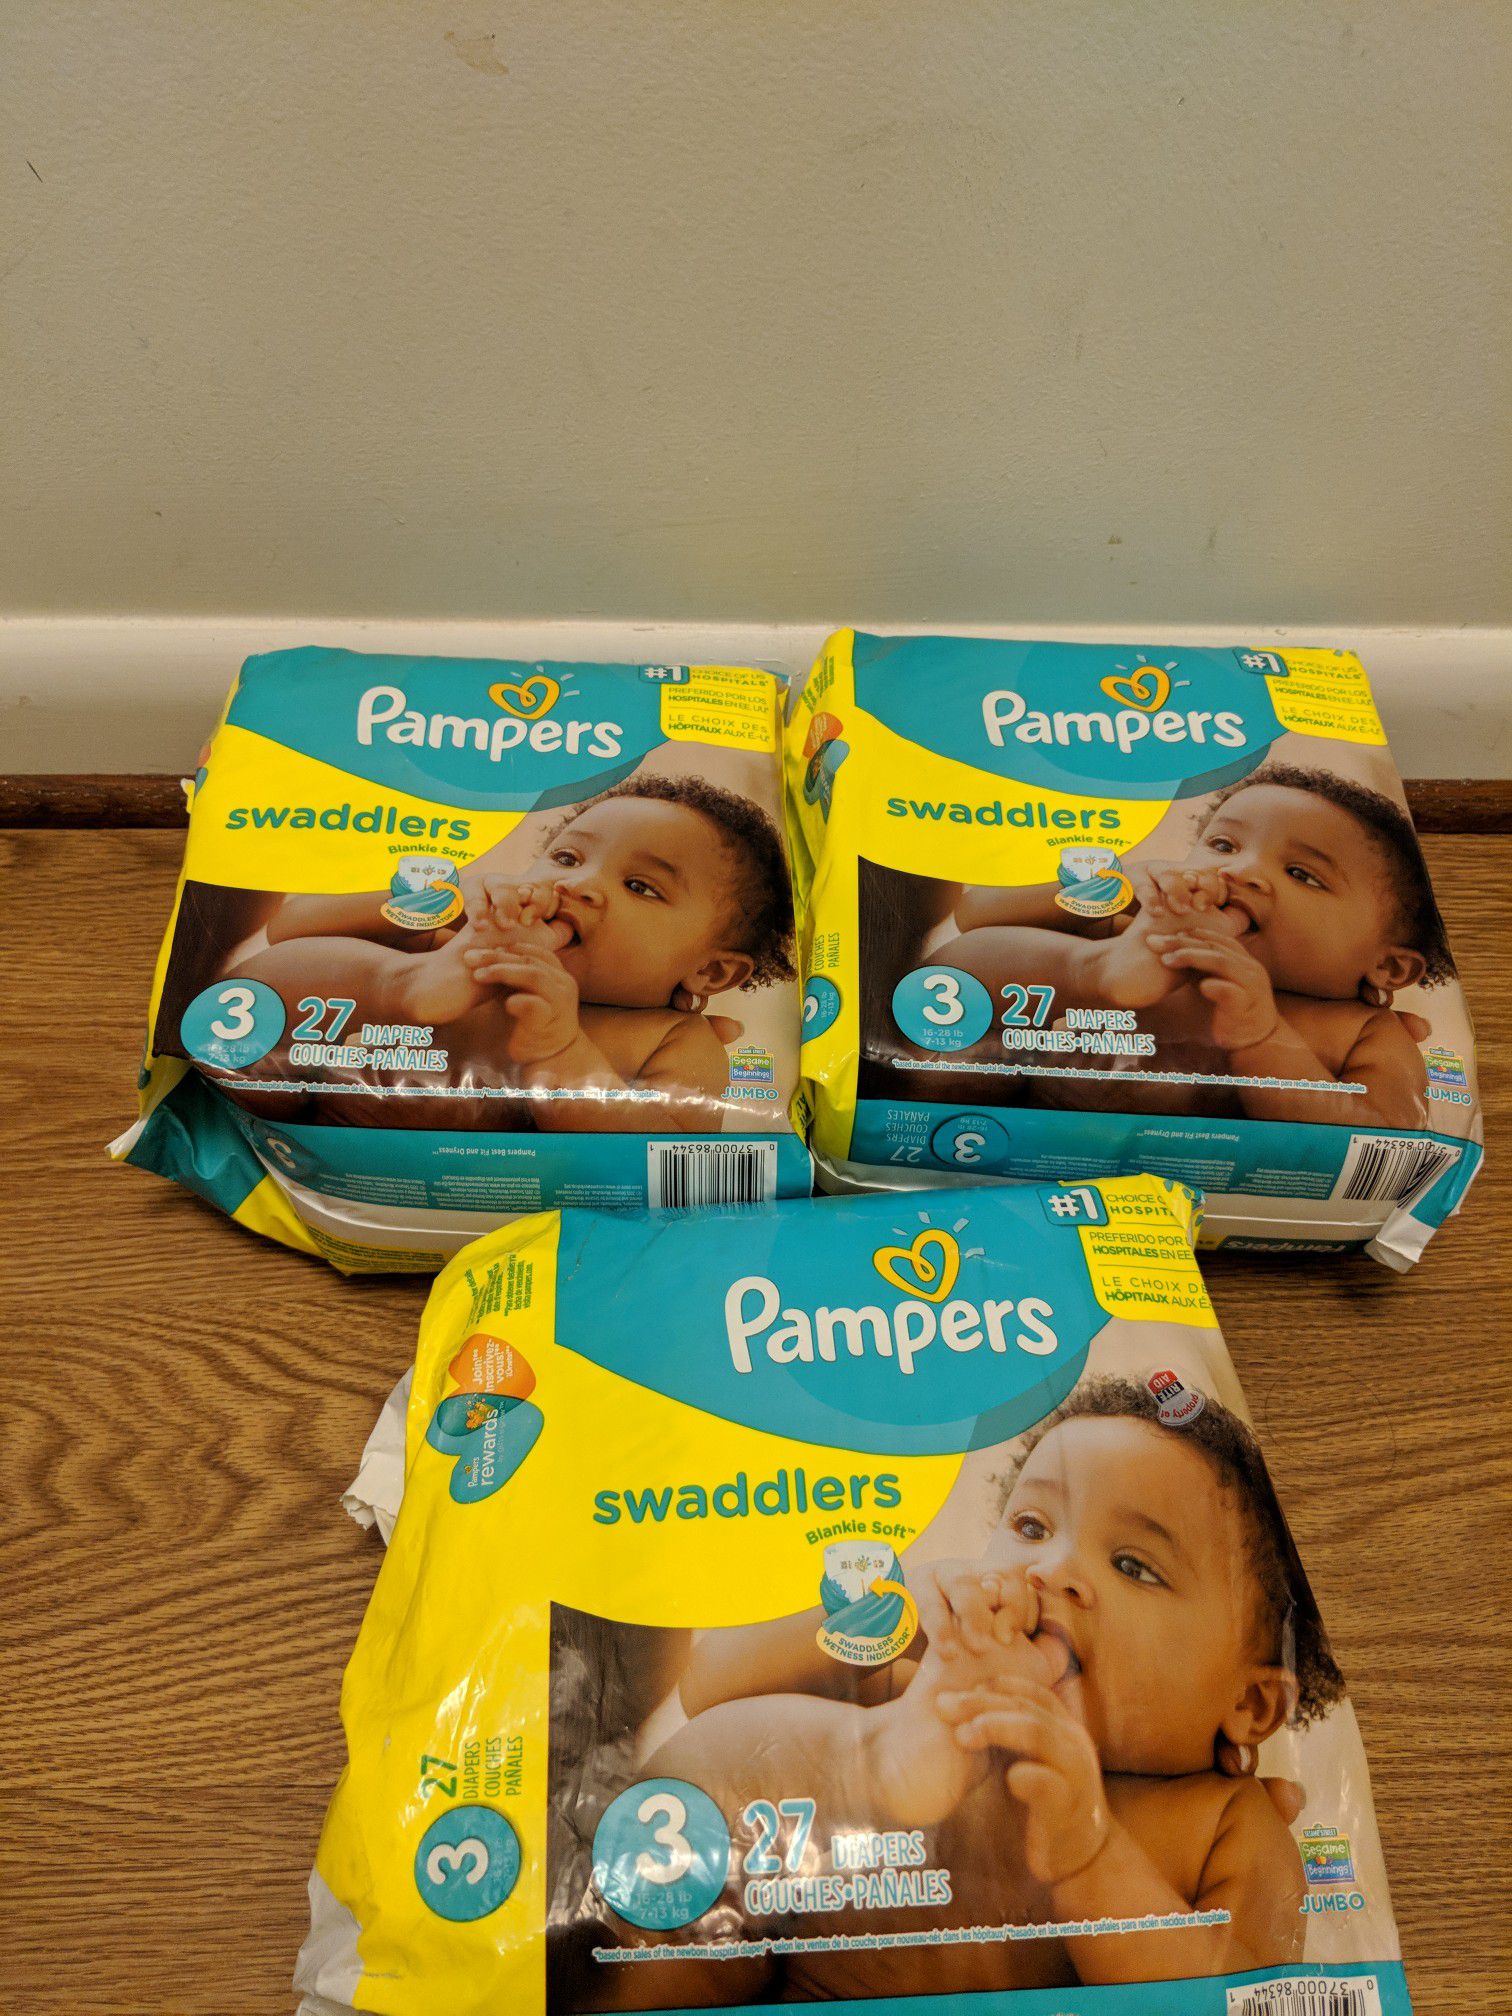 Pampers swaddlers size 3 or 4